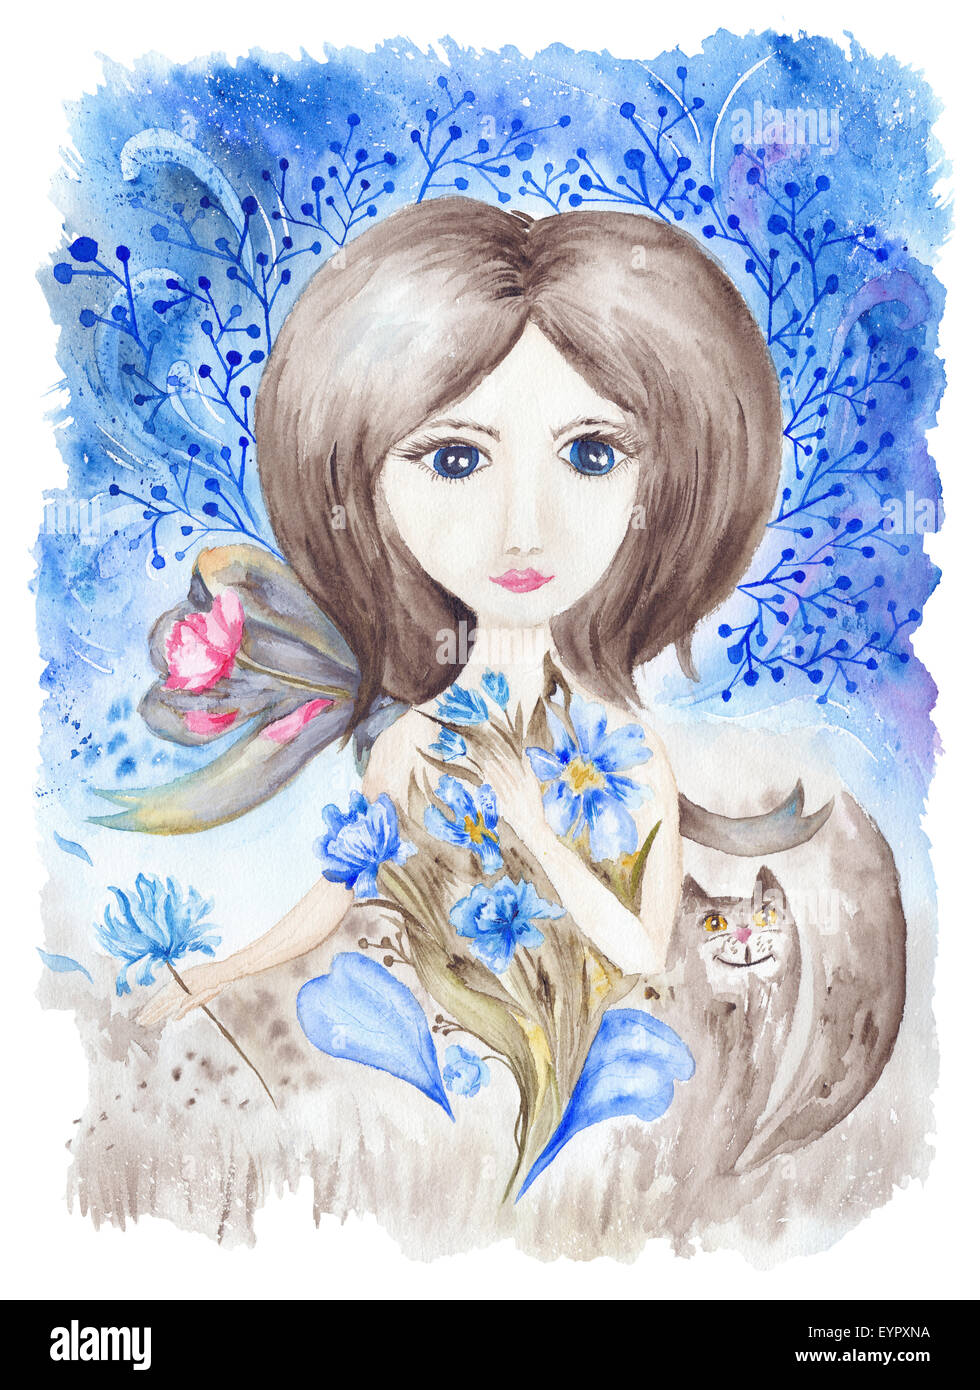 Creative artwork with magic fairytale character holding flowers in her hands on blue winter background Stock Photo